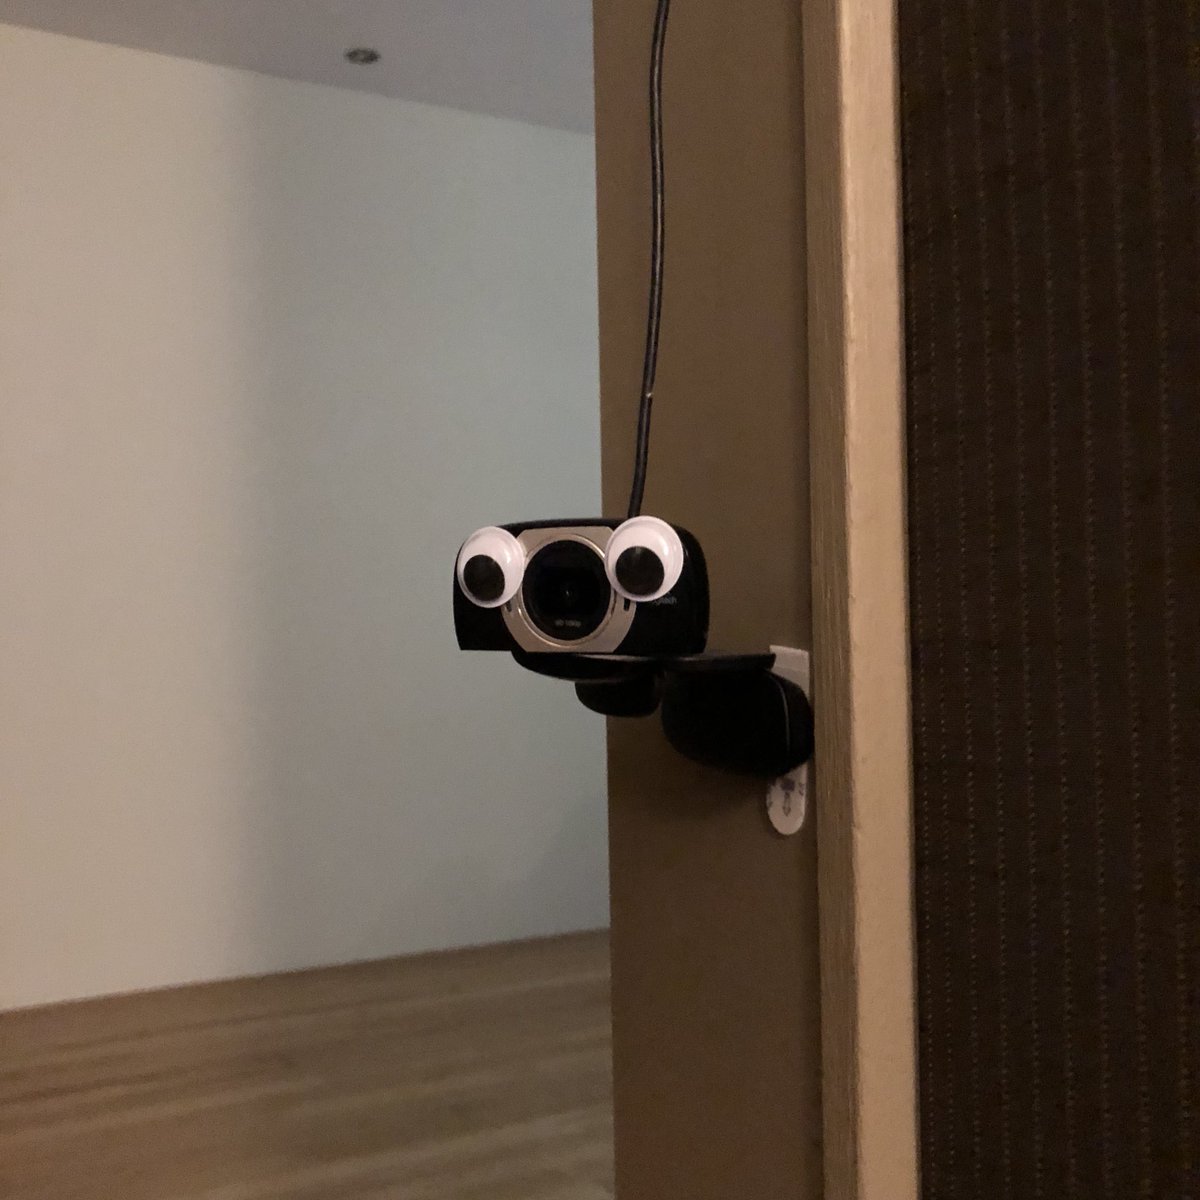 A tip for new streamers...
Put googly eyes on your webcam so that you can practice eye contact and pretend everyone watching you is amazed.